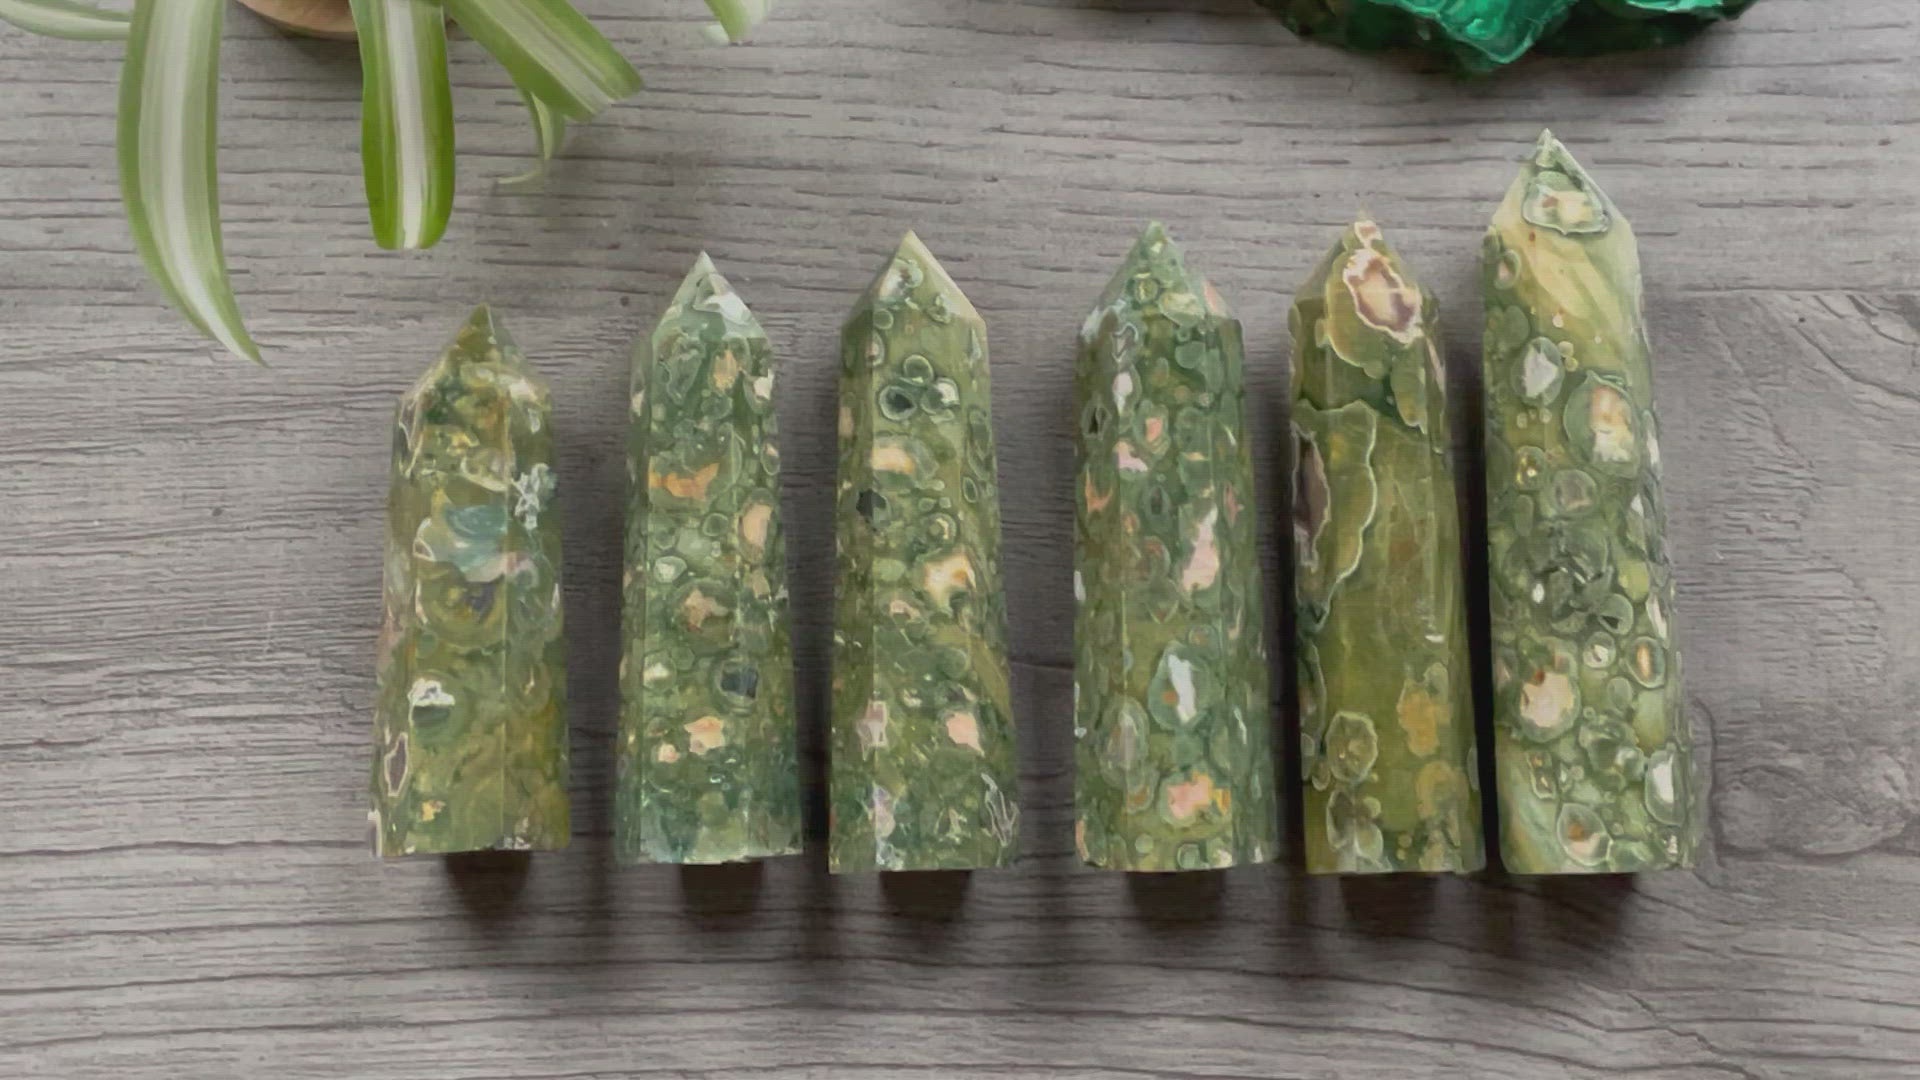 Pictured are various points of rainforest jasper.